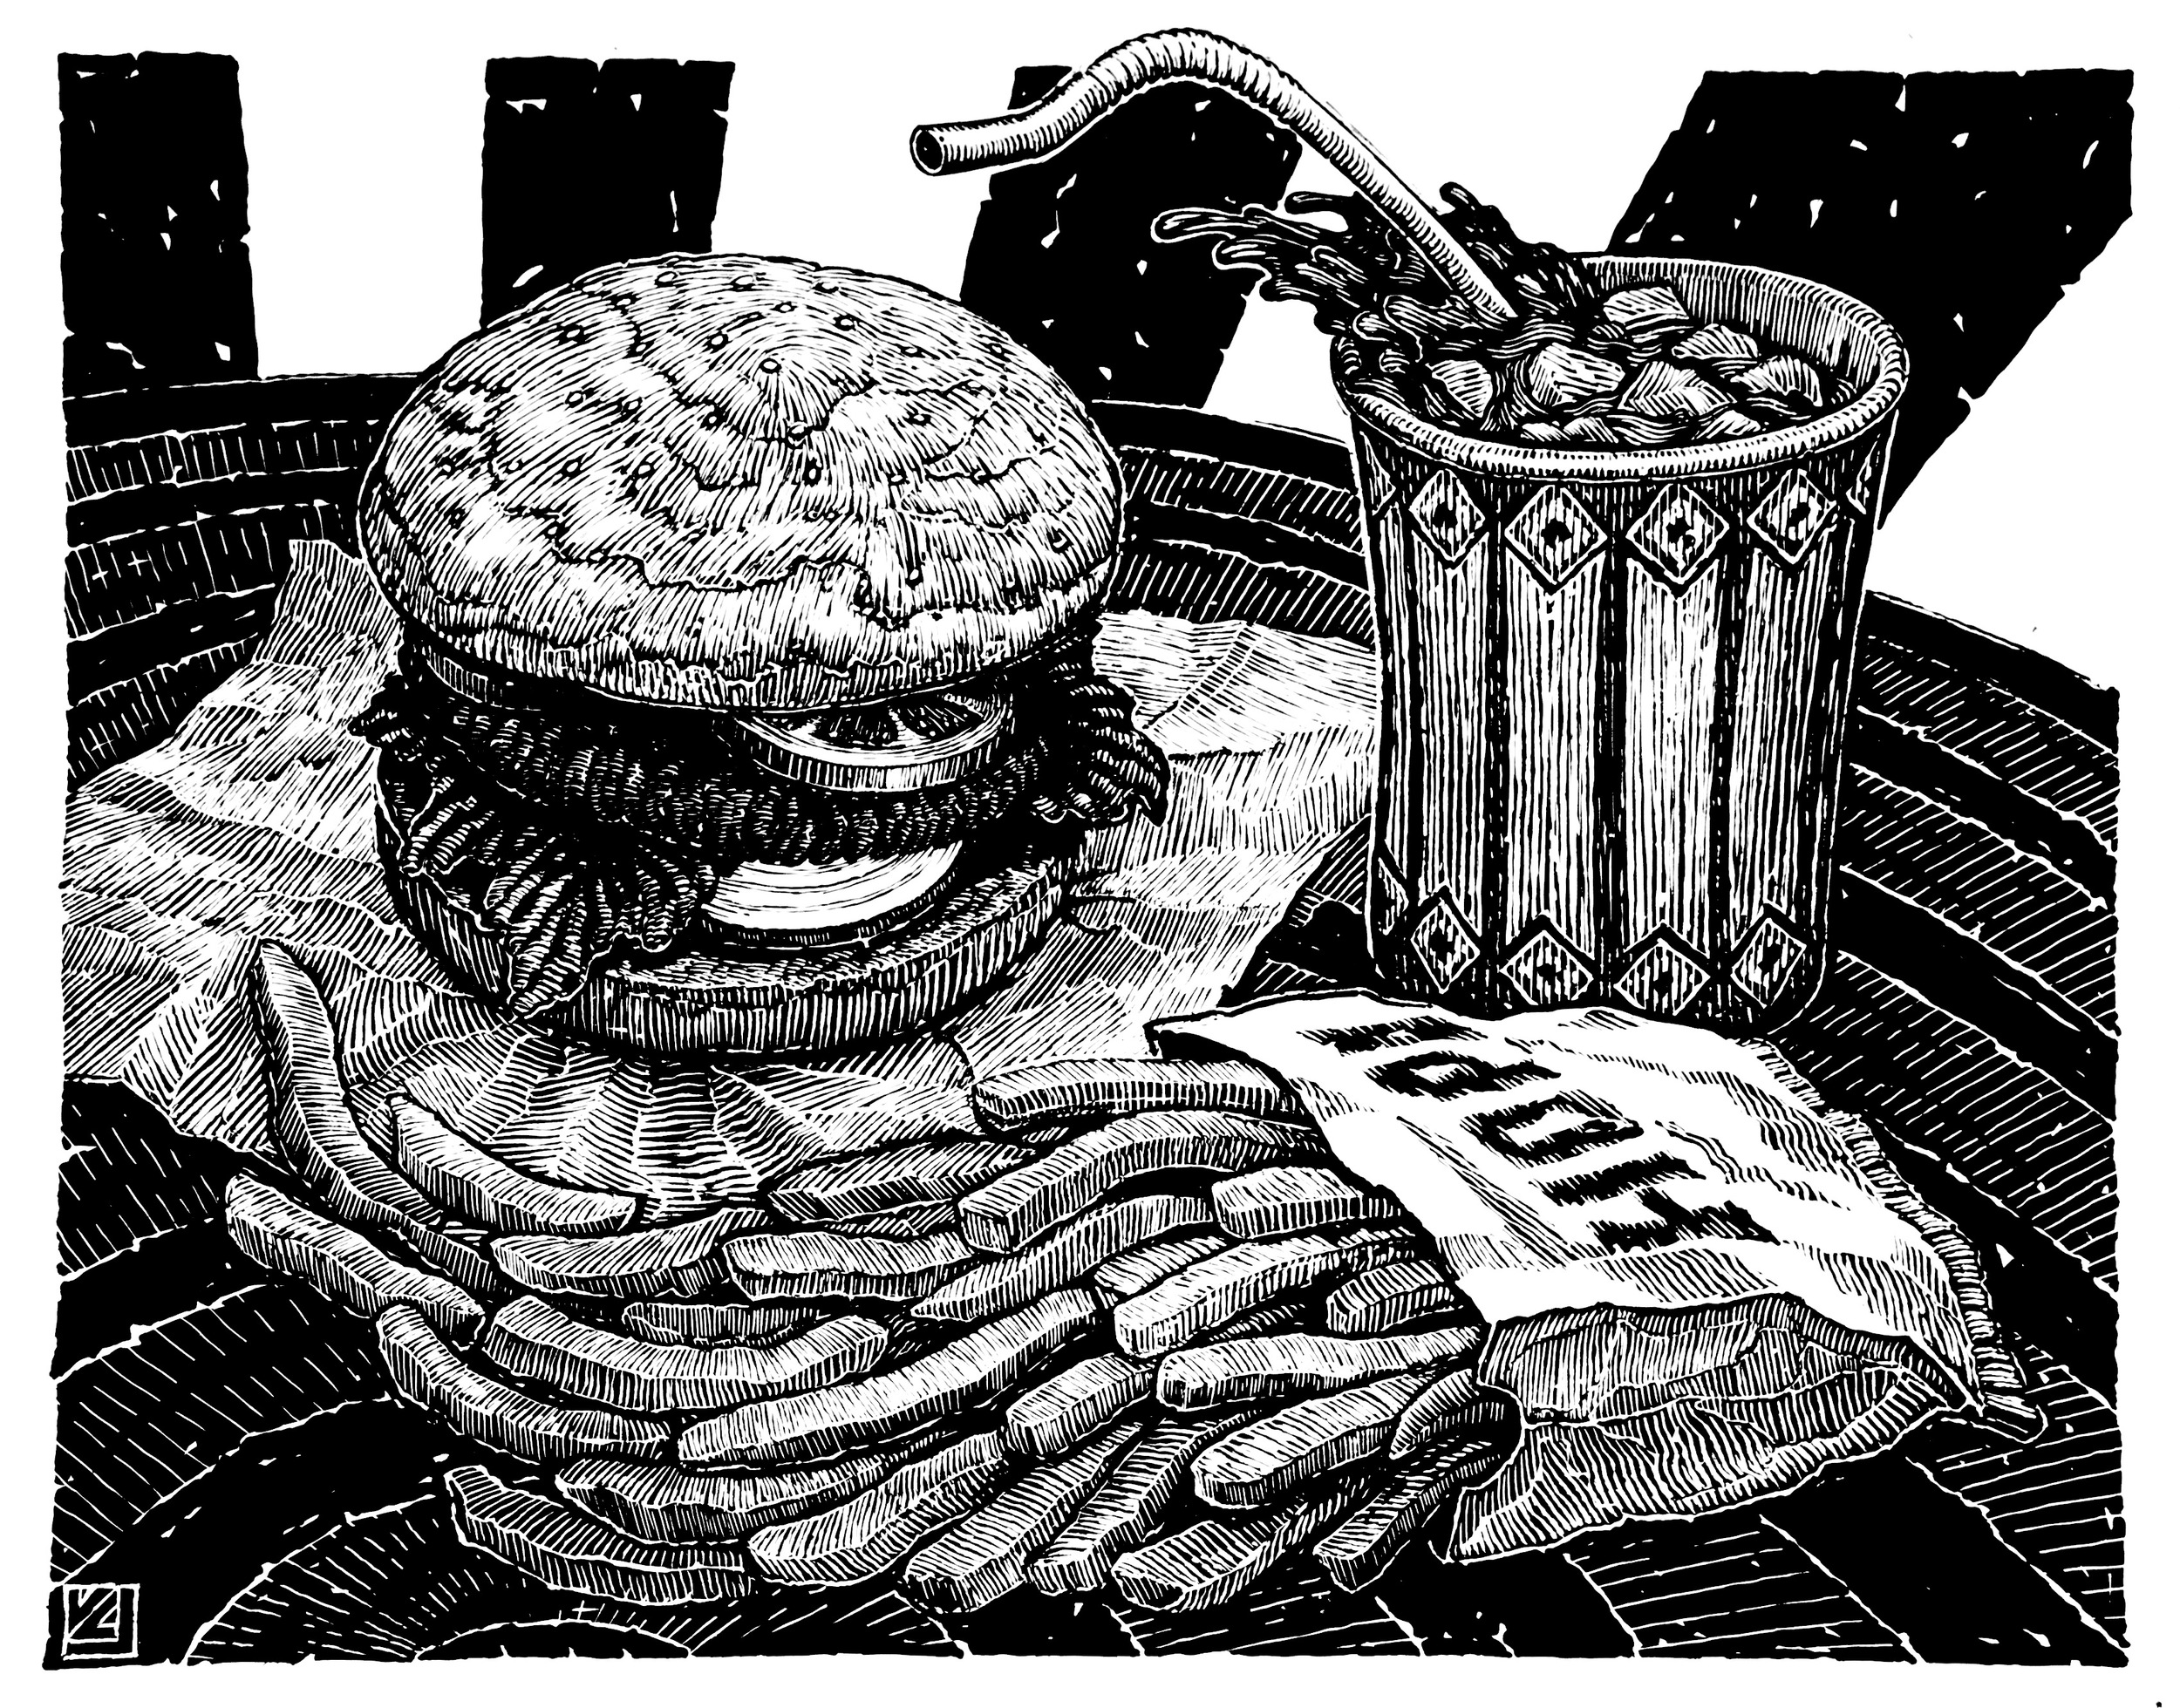 "Burger & Fries" by Vernon Courtlandt Johnson. © 1988 VCJ. All rights reserved.